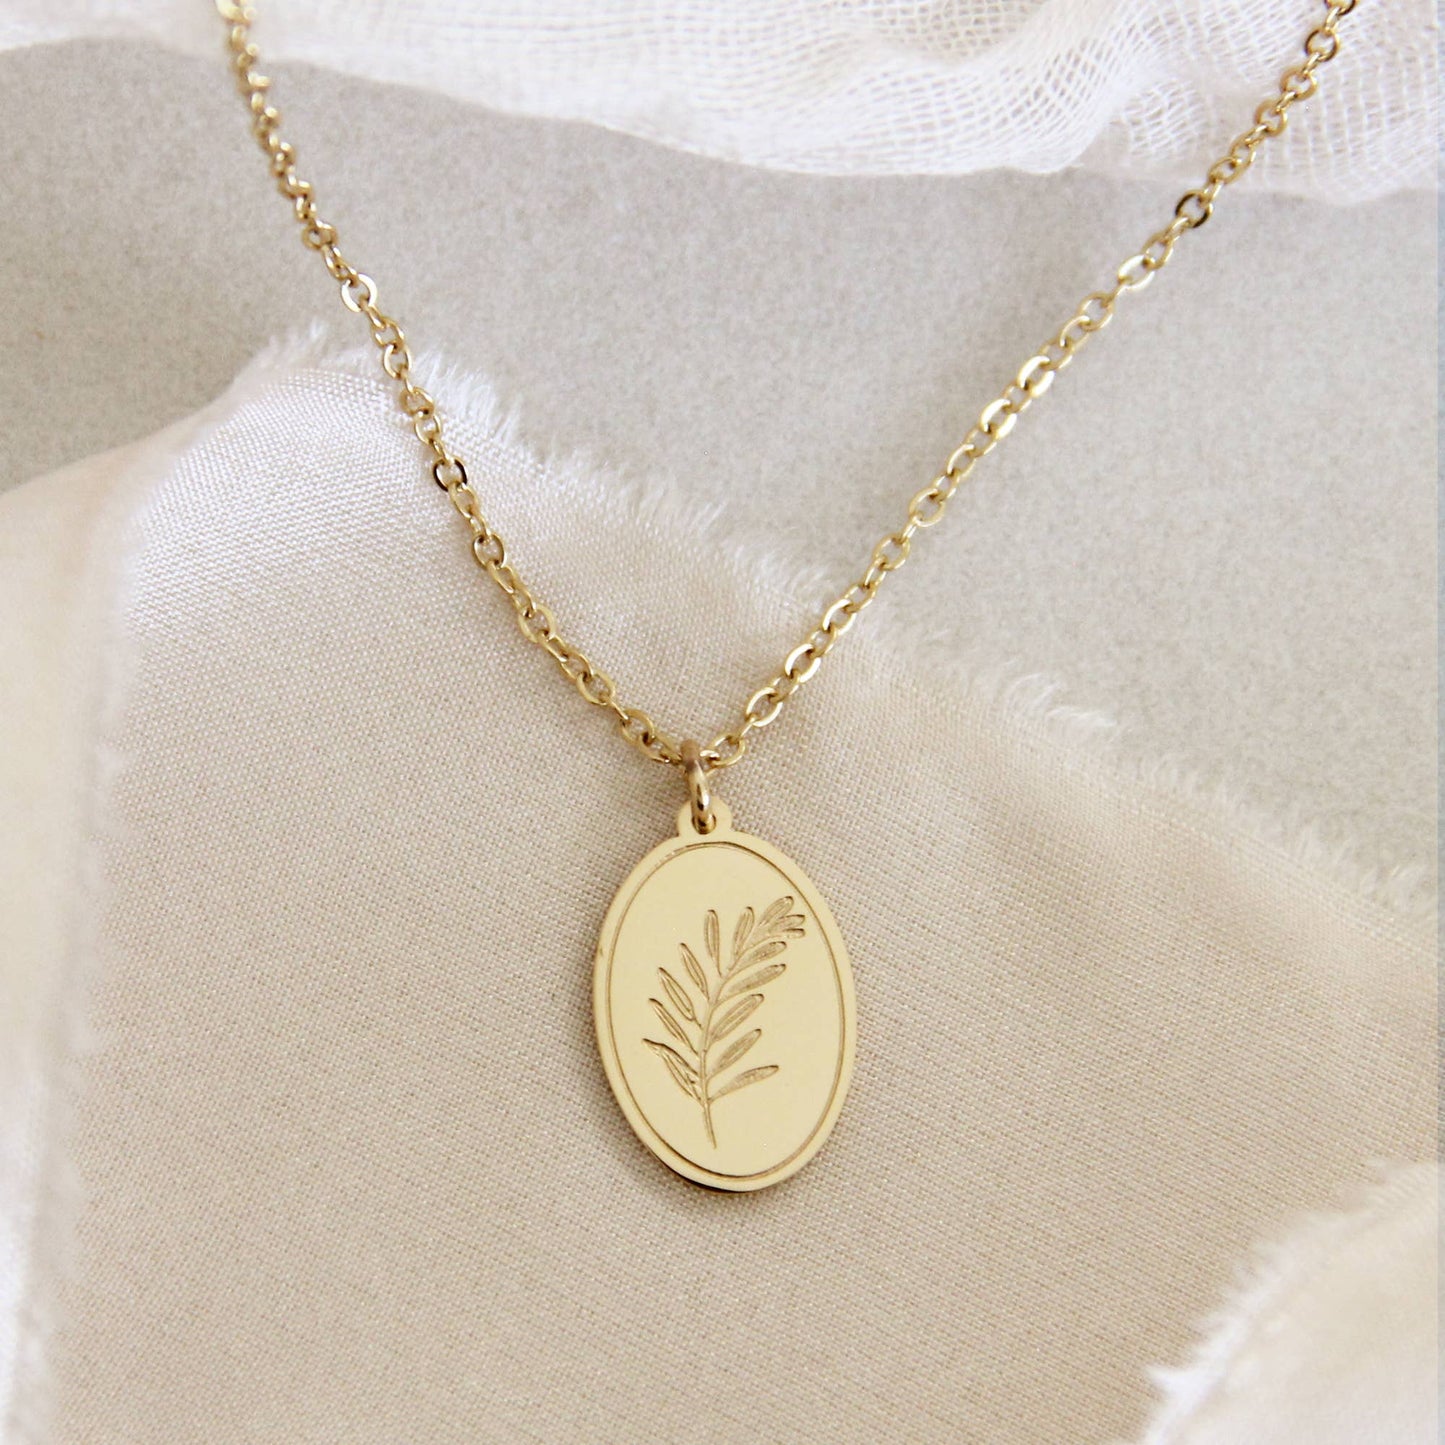 Olive Branch Peace Necklace, Promises of God, Cross Necklace